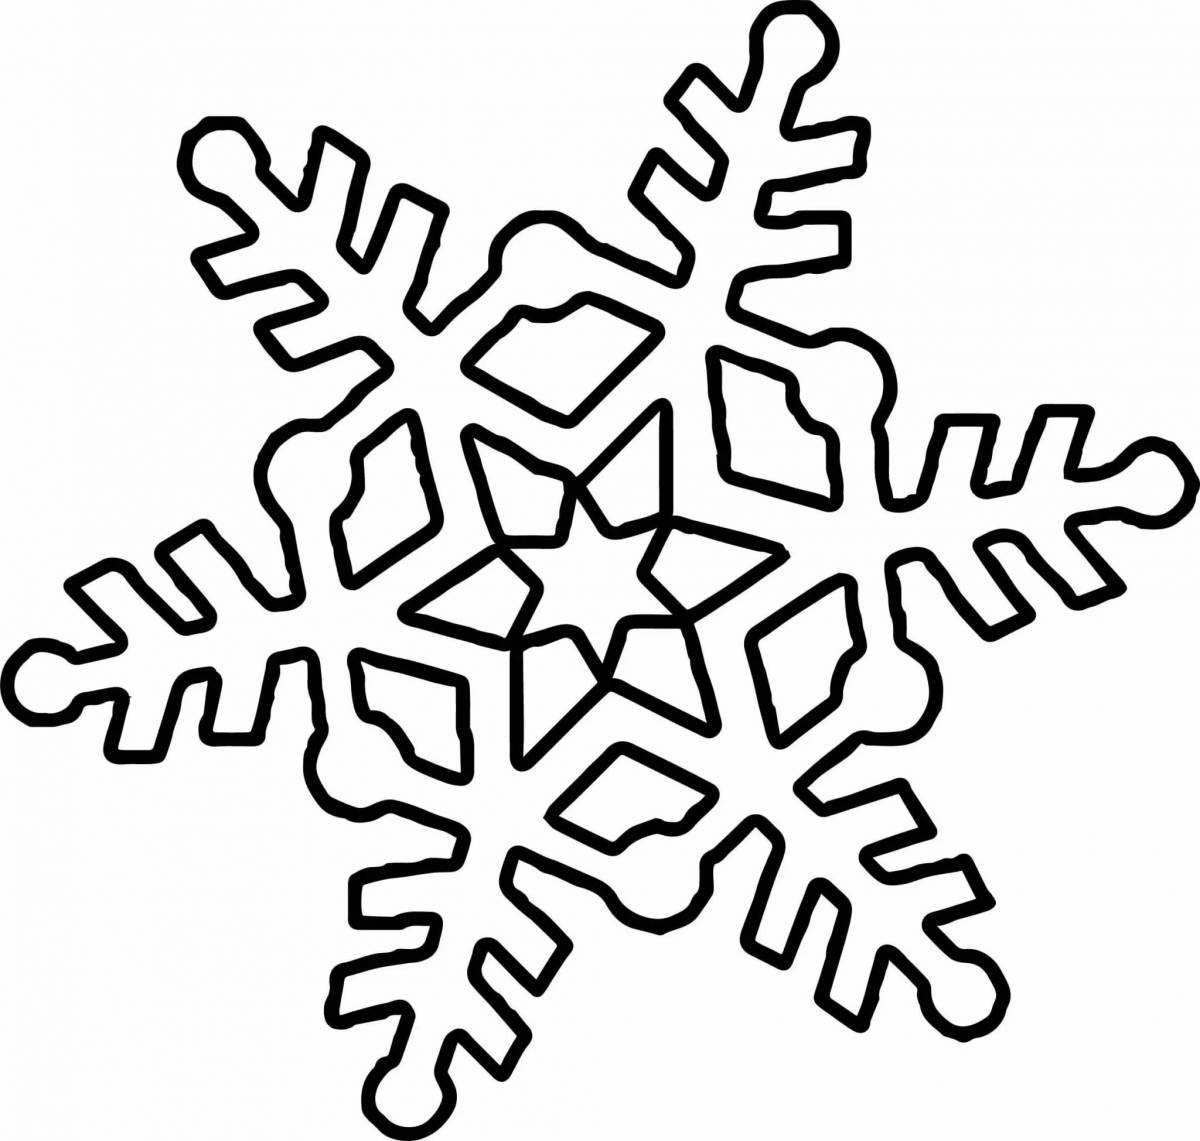 Snowflake Inspirational Coloring Page